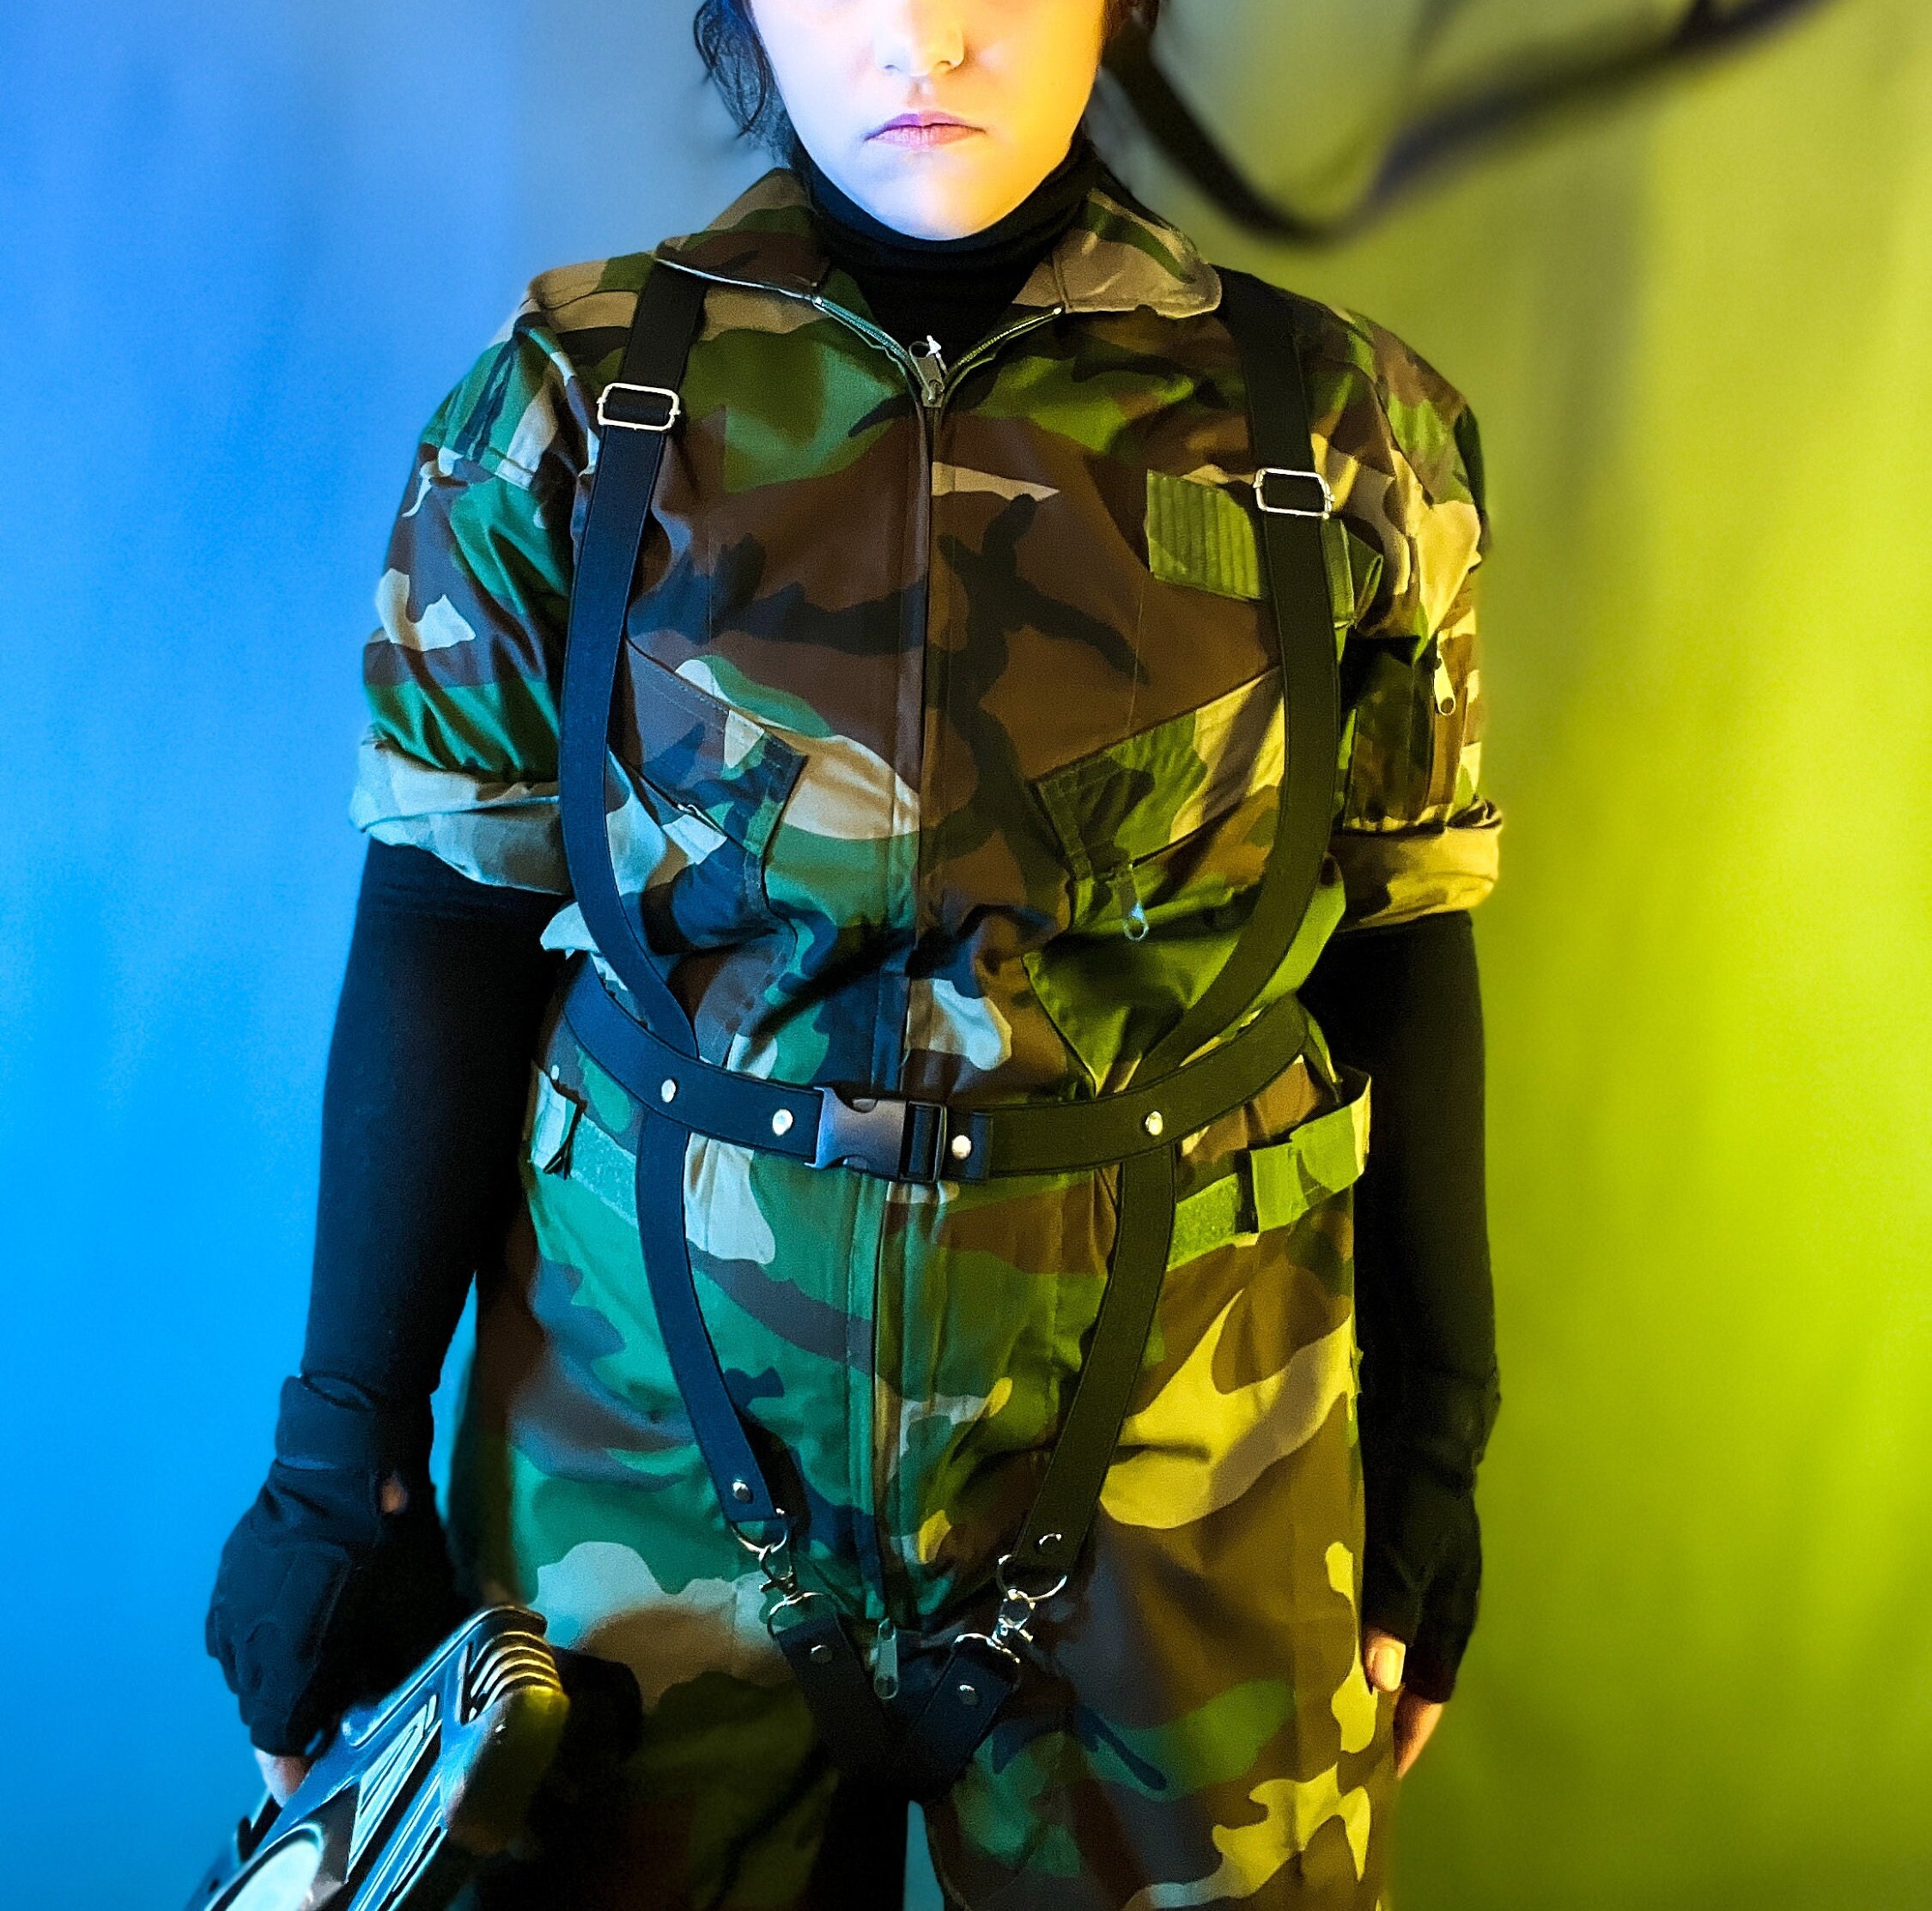 Metal Gear Solid 3, The Boss COSPLAY